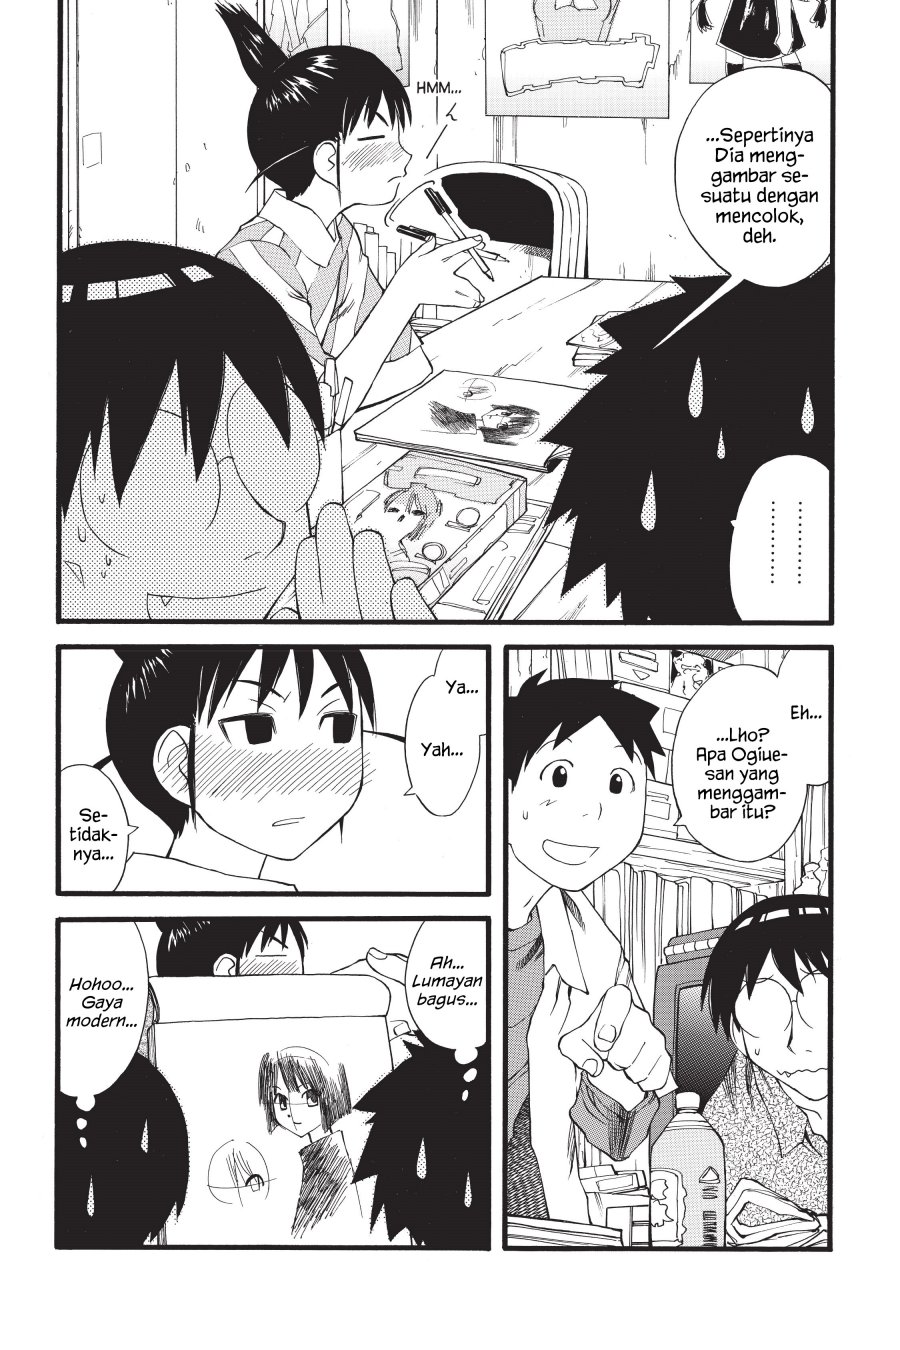 Genshiken – The Society for the Study of Modern Visual Culture Chapter 27 Image 5